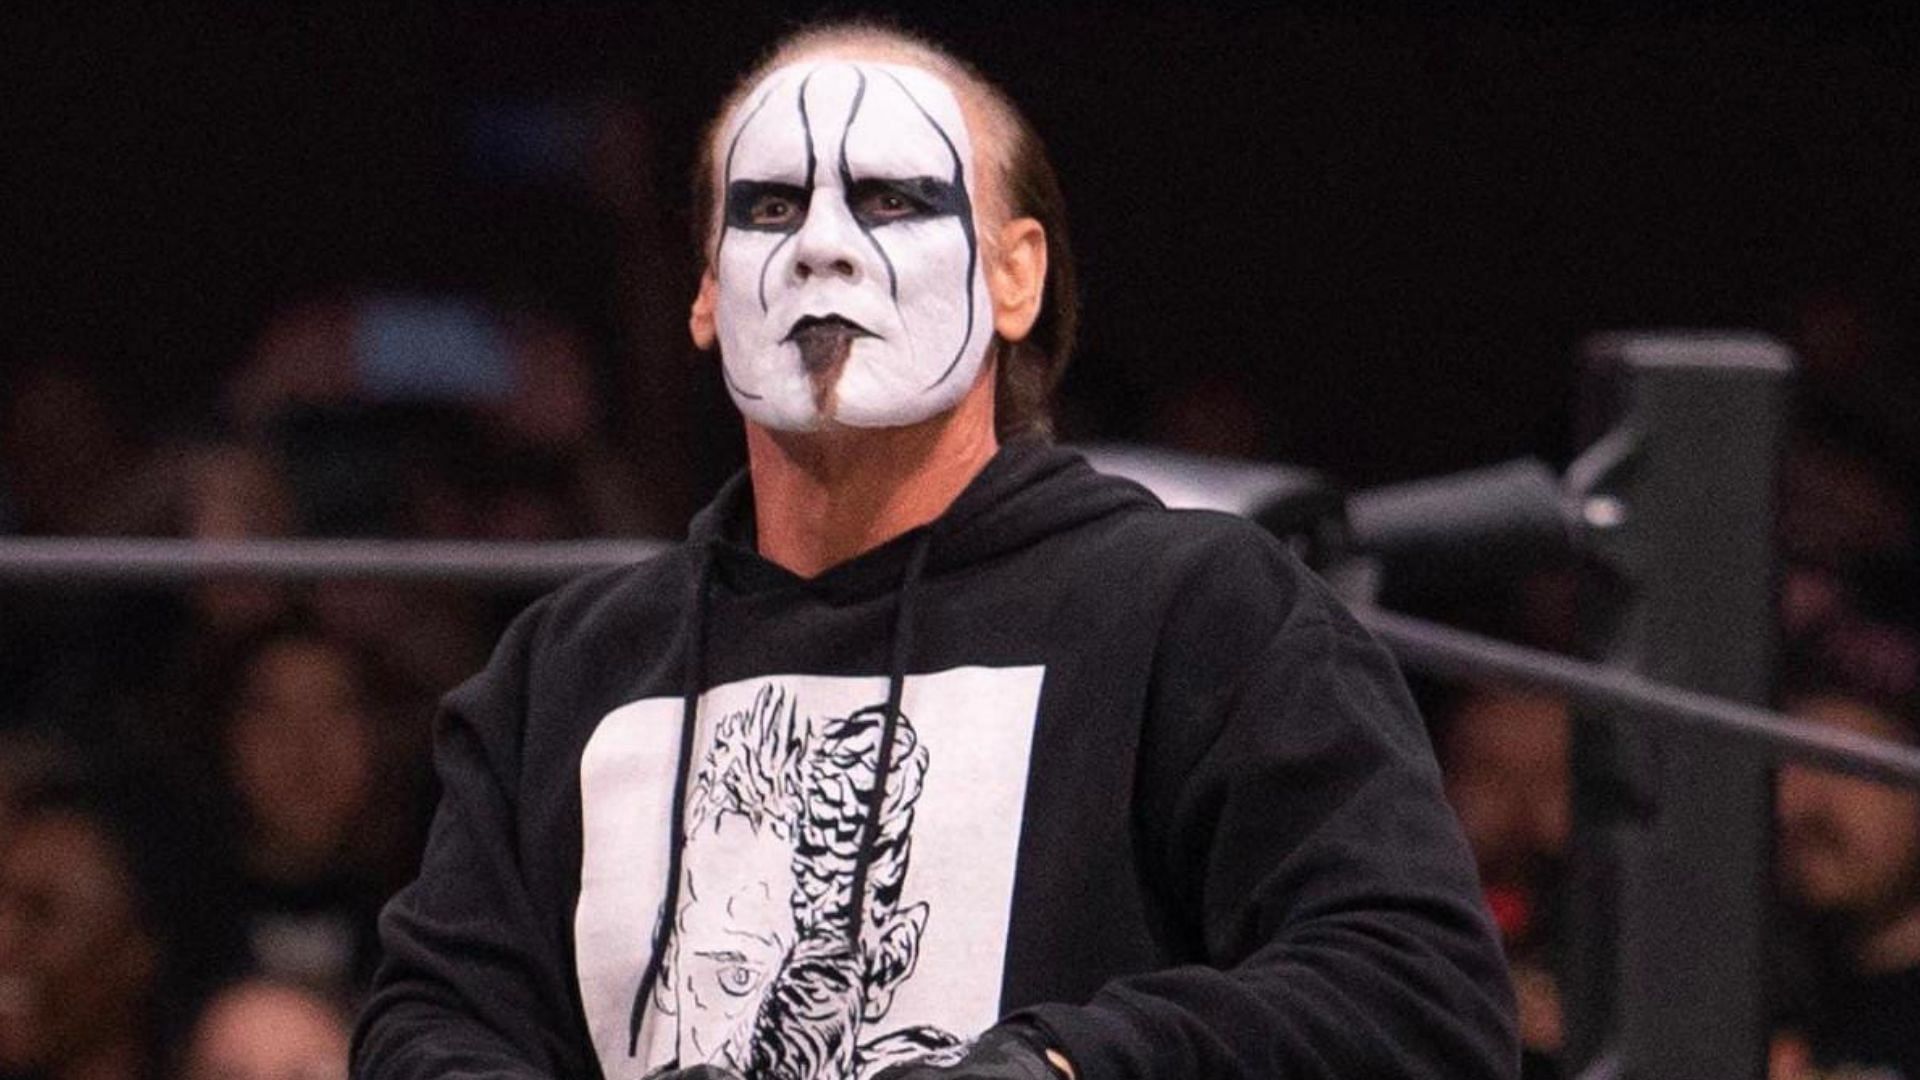 Former WWE Superstar Sting is a multi-time world champion